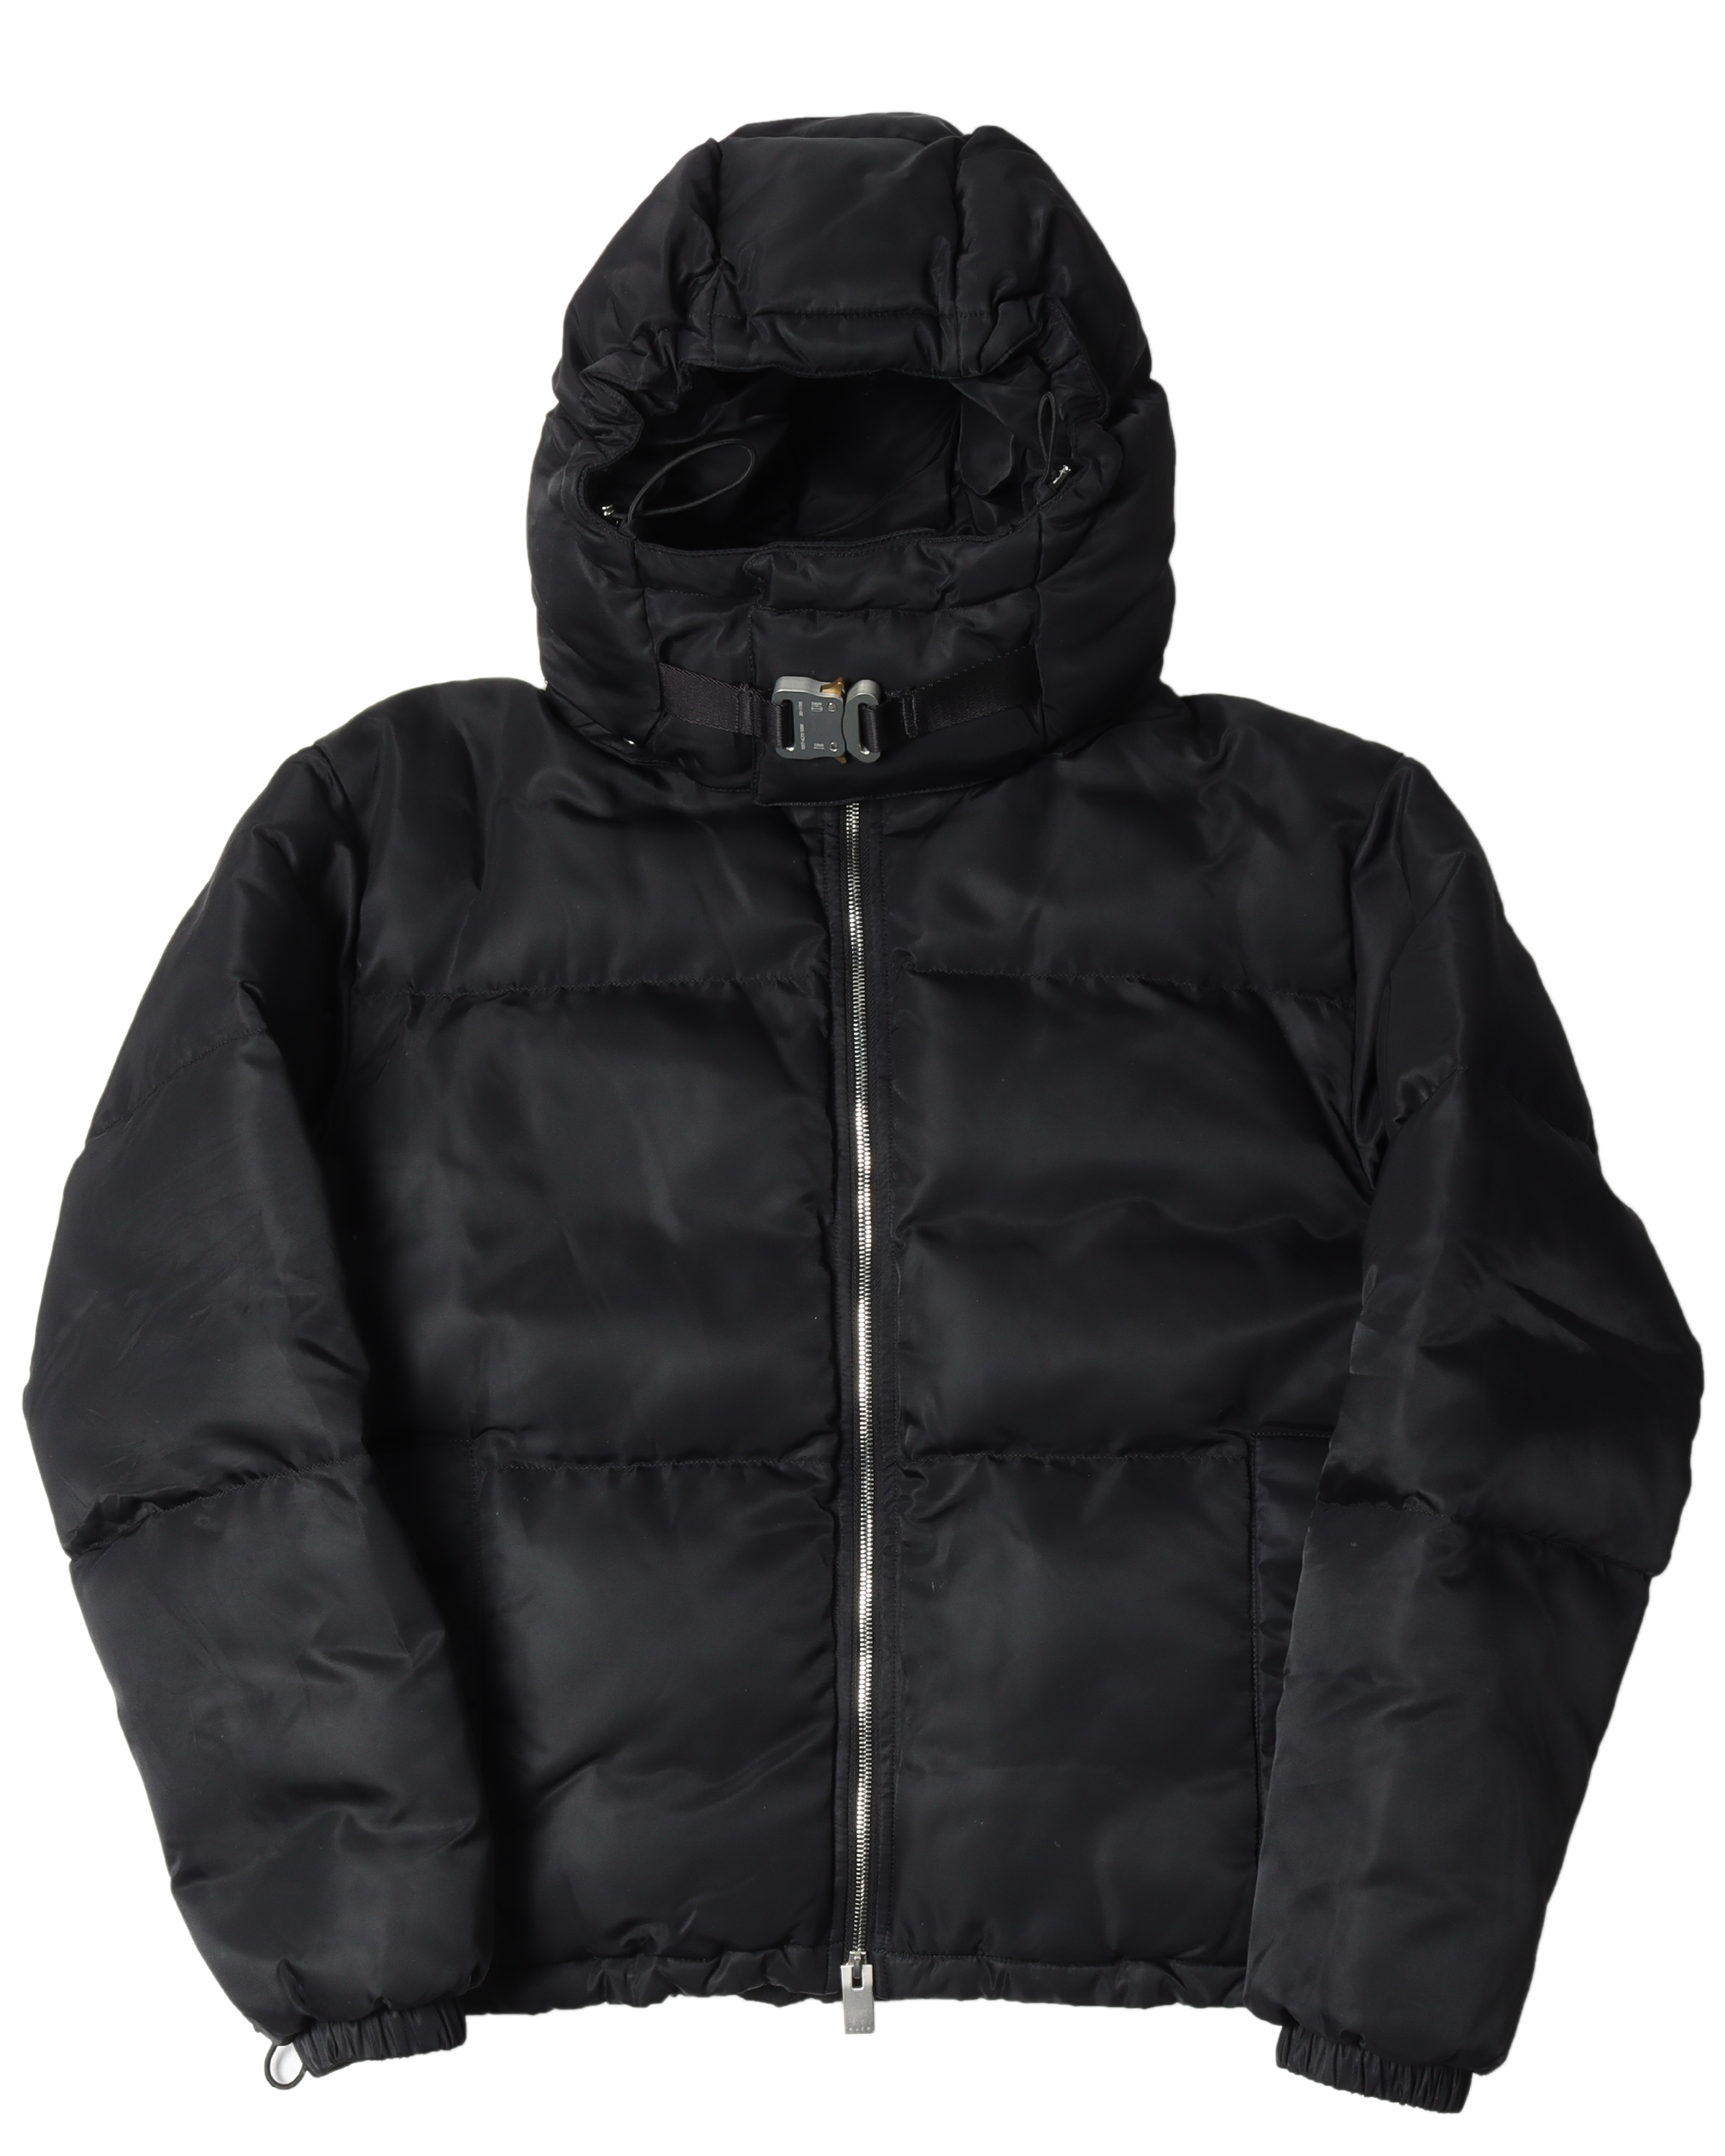 1017 ALYX 9SM Hooded Puffer Jacket